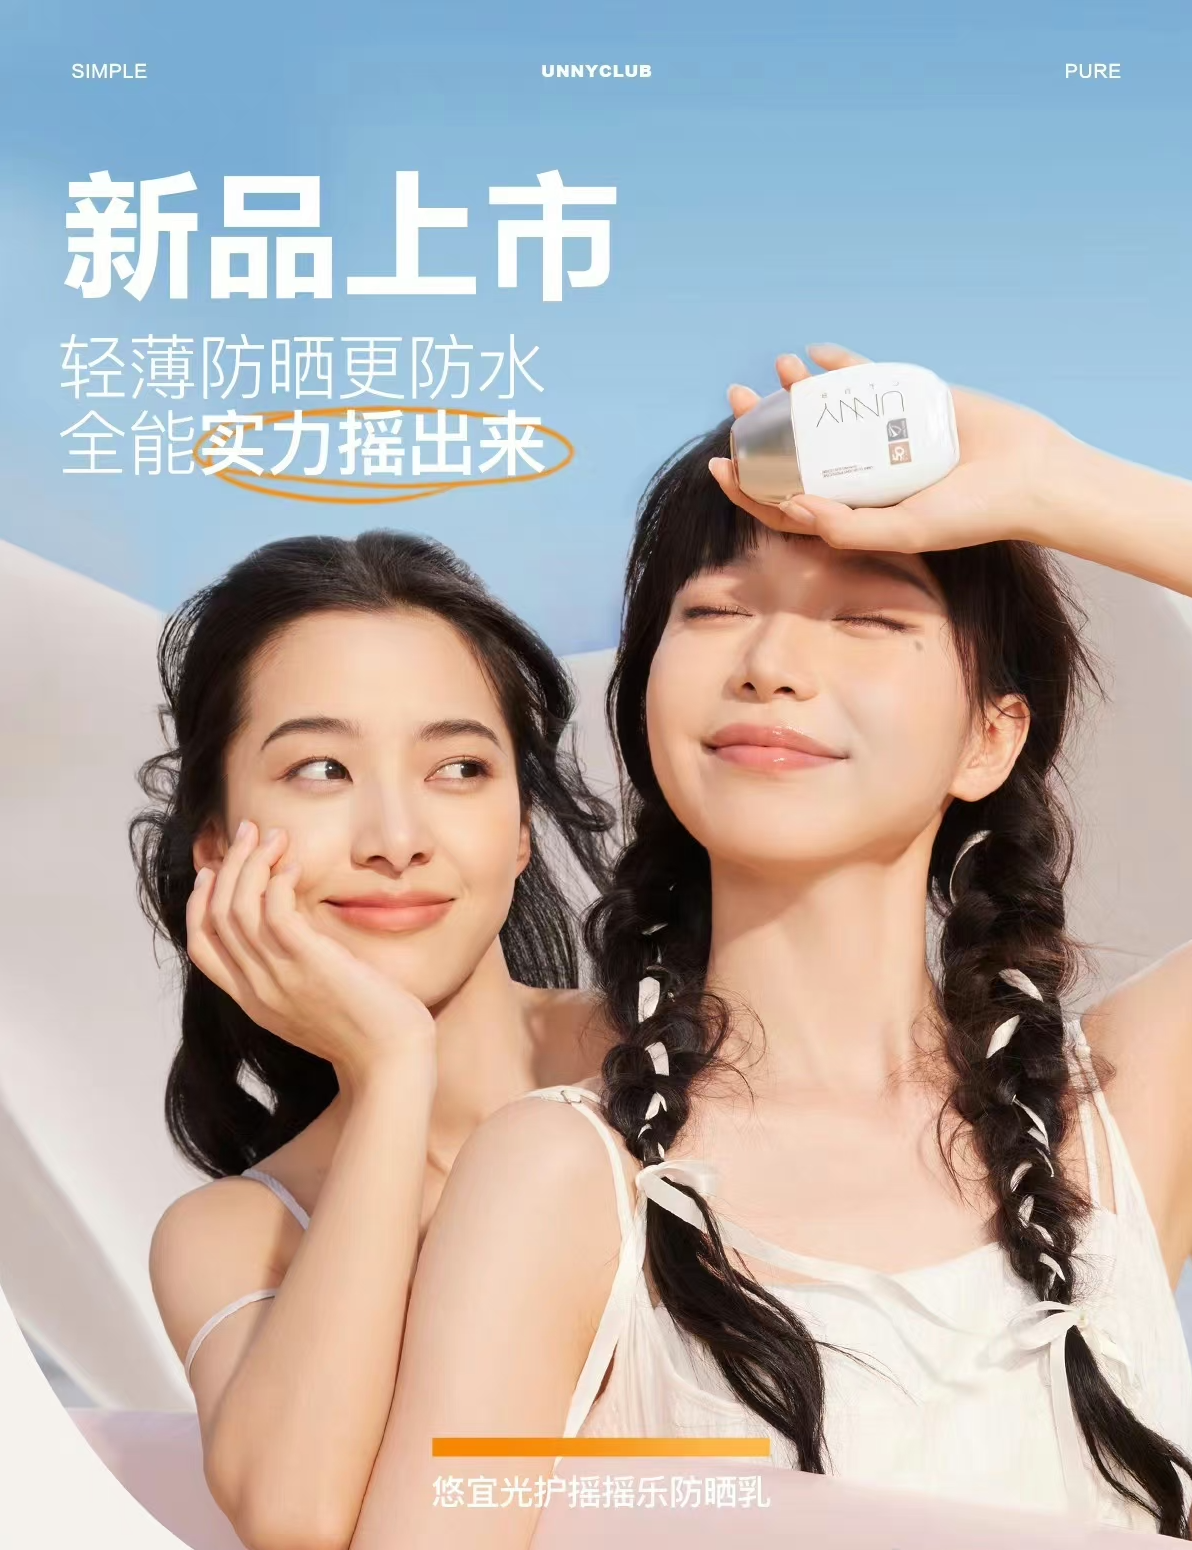 China's minimalist natural beauty brand Unny Club is pioneering waterproof and sweat-proof technology. Image: Unny Club's Weibo